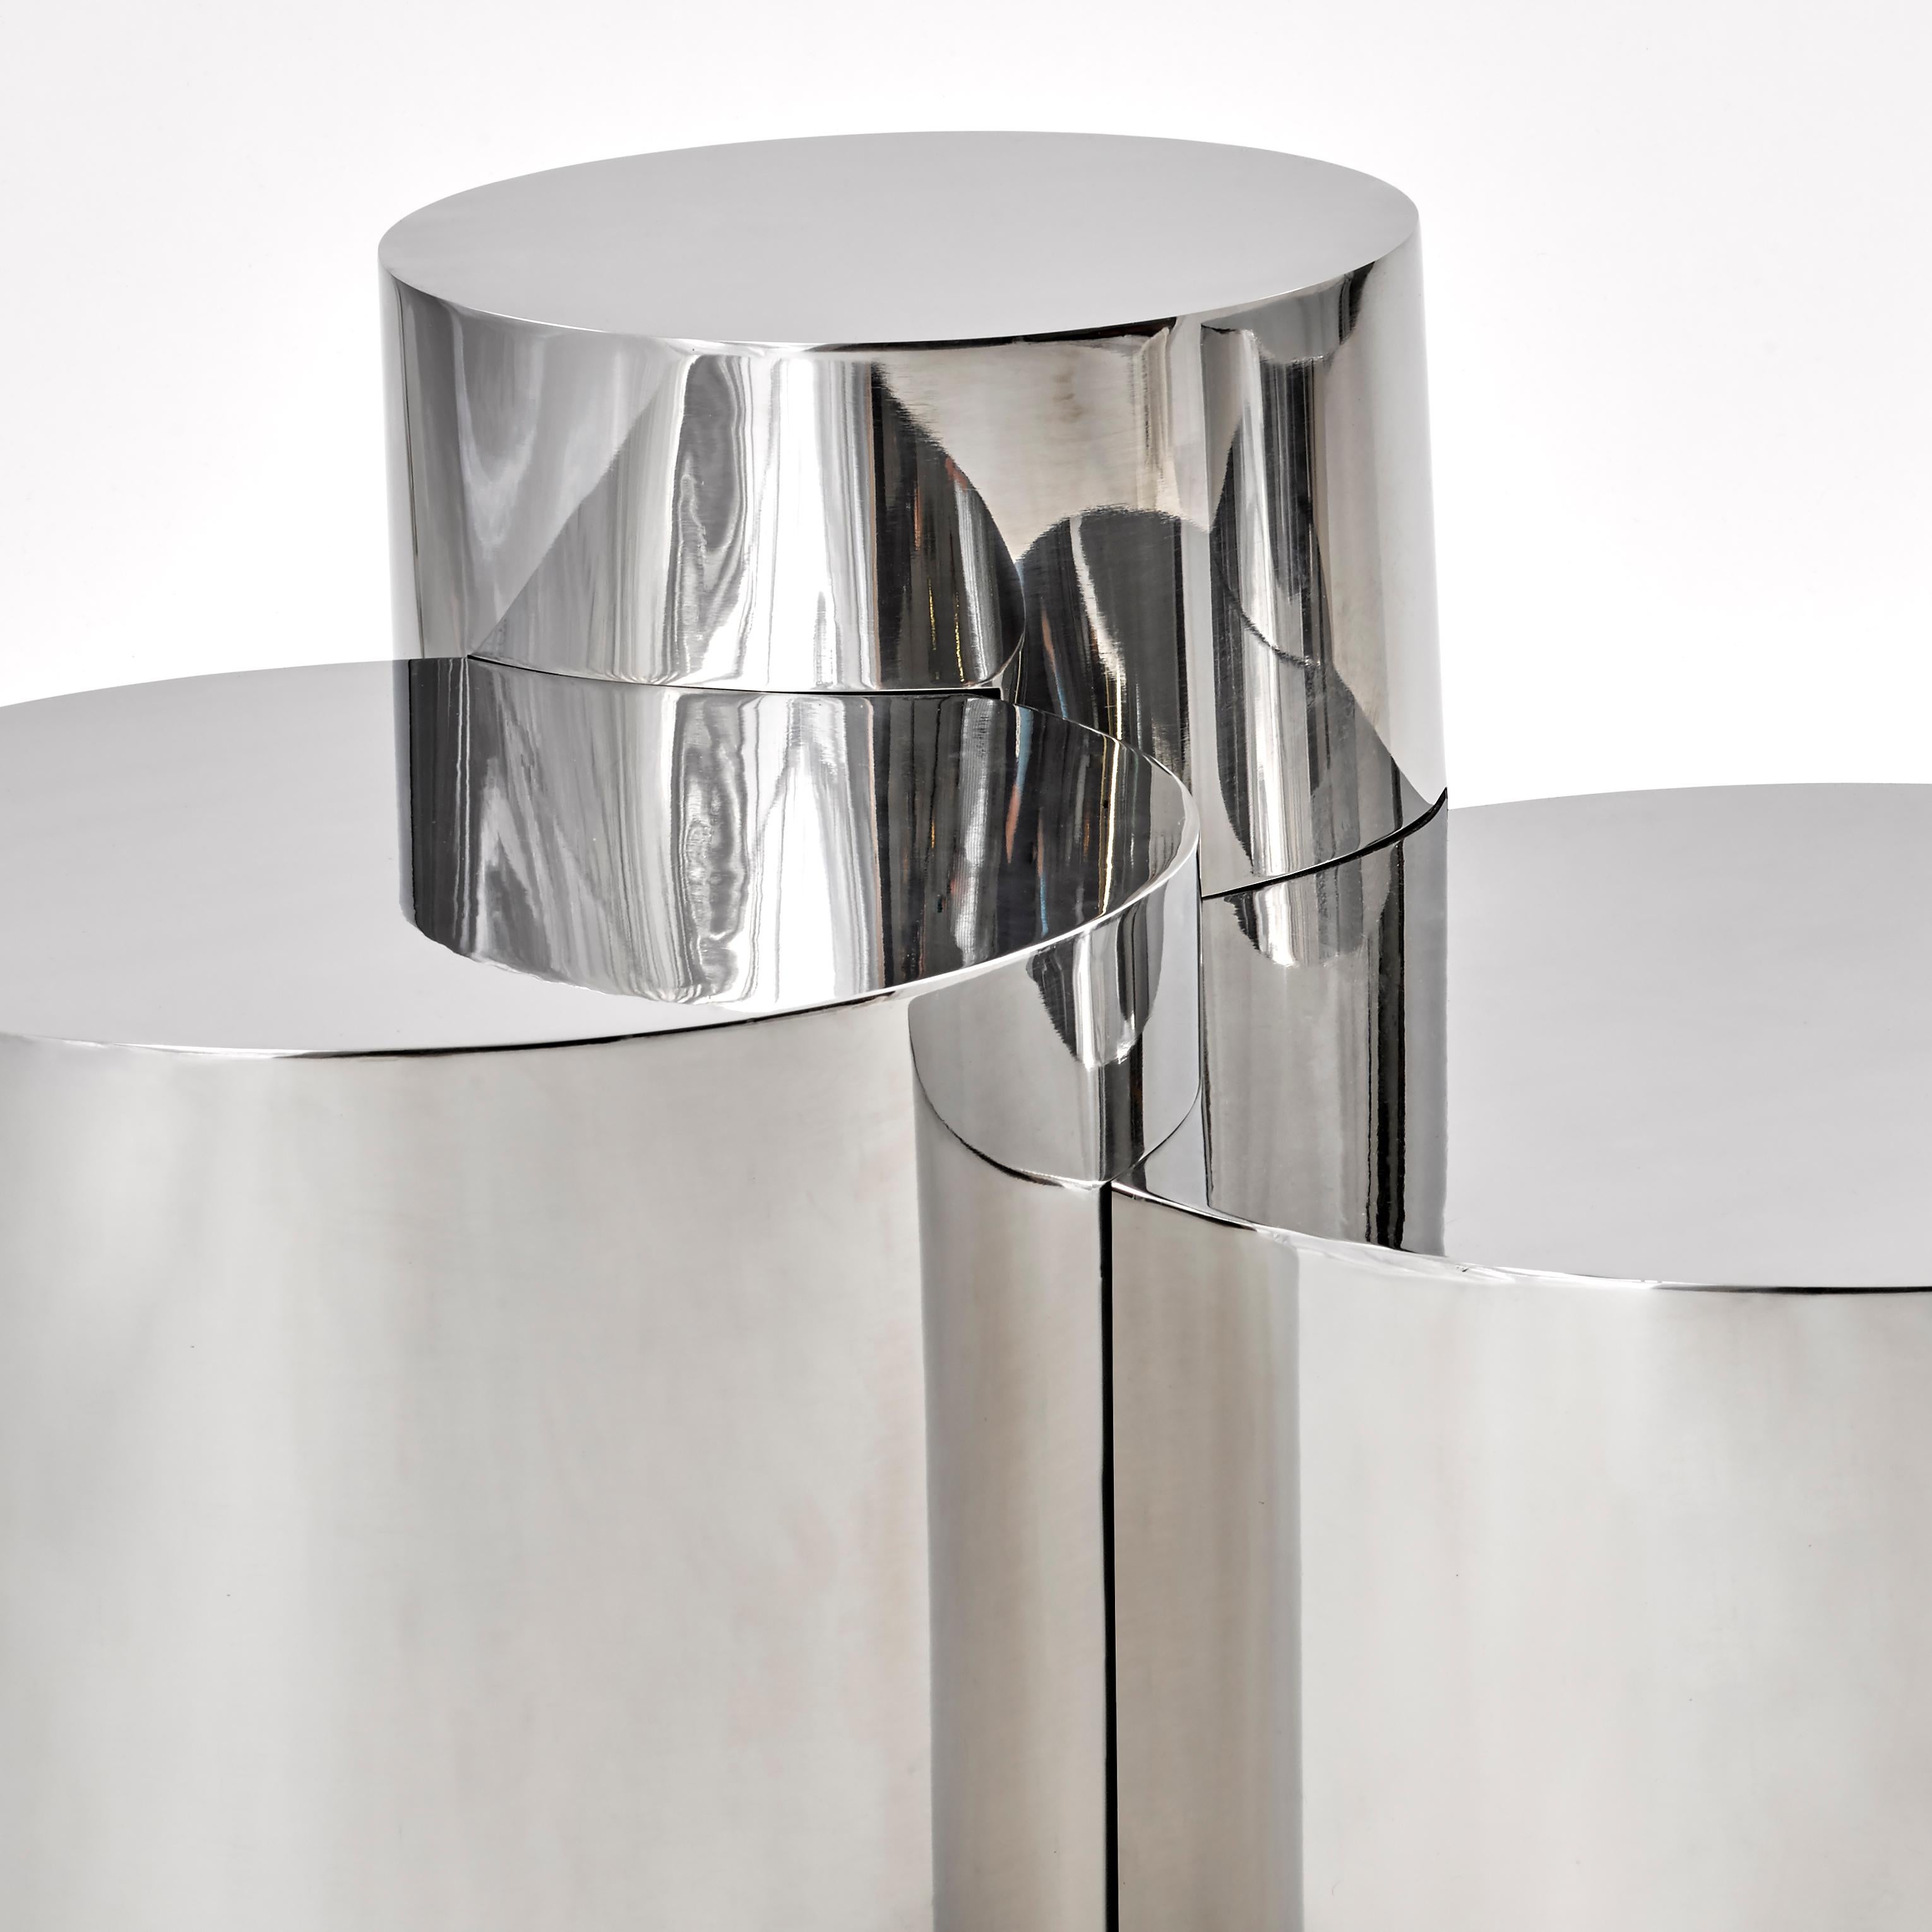 The Geometria: Cerchi #4 table by form A elevates the Minimalist form of the cylinder by joining and overlapping them to create a highly sculptural piece. Shown in polished steel with three cylinders.

Customization Options: 

Each piece is